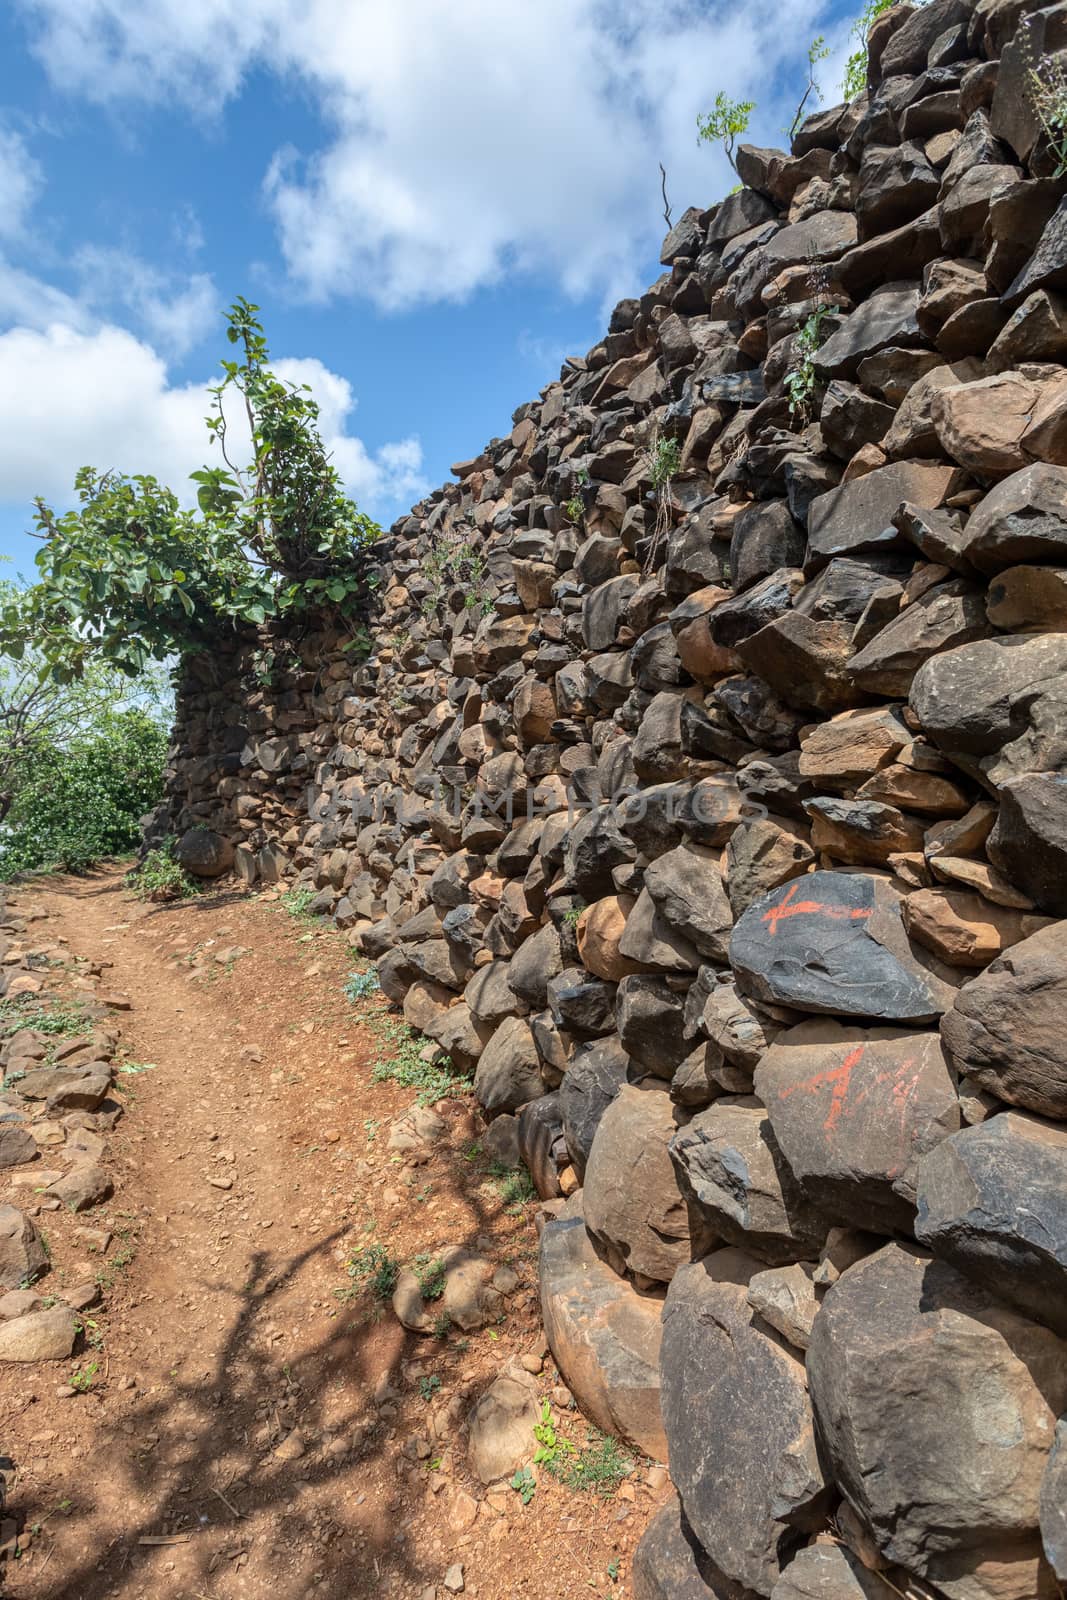 Narrow pathway in Konso, walled village tribes Konso. Africa, Ethiopia. Konso villages are listed as UNESCO World Heritage sites.